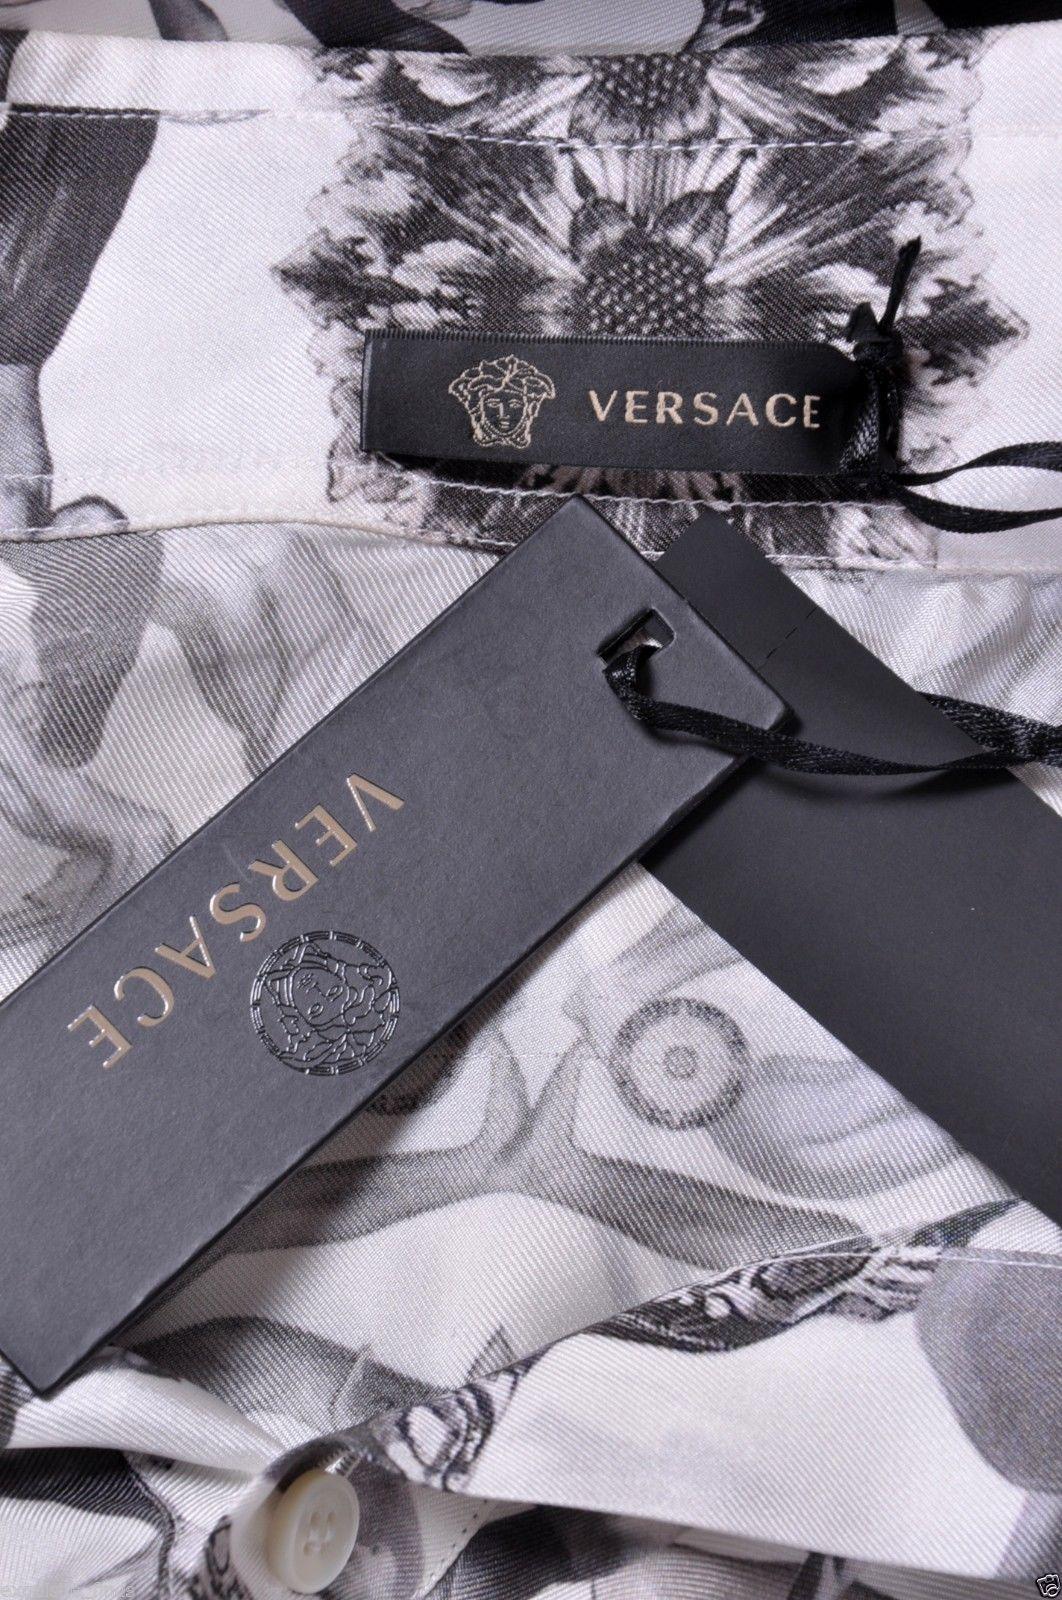 NEW VERSACE 100% SILK SHIRT in ICONIC BLACK and WHITE PRINT for MEN 1